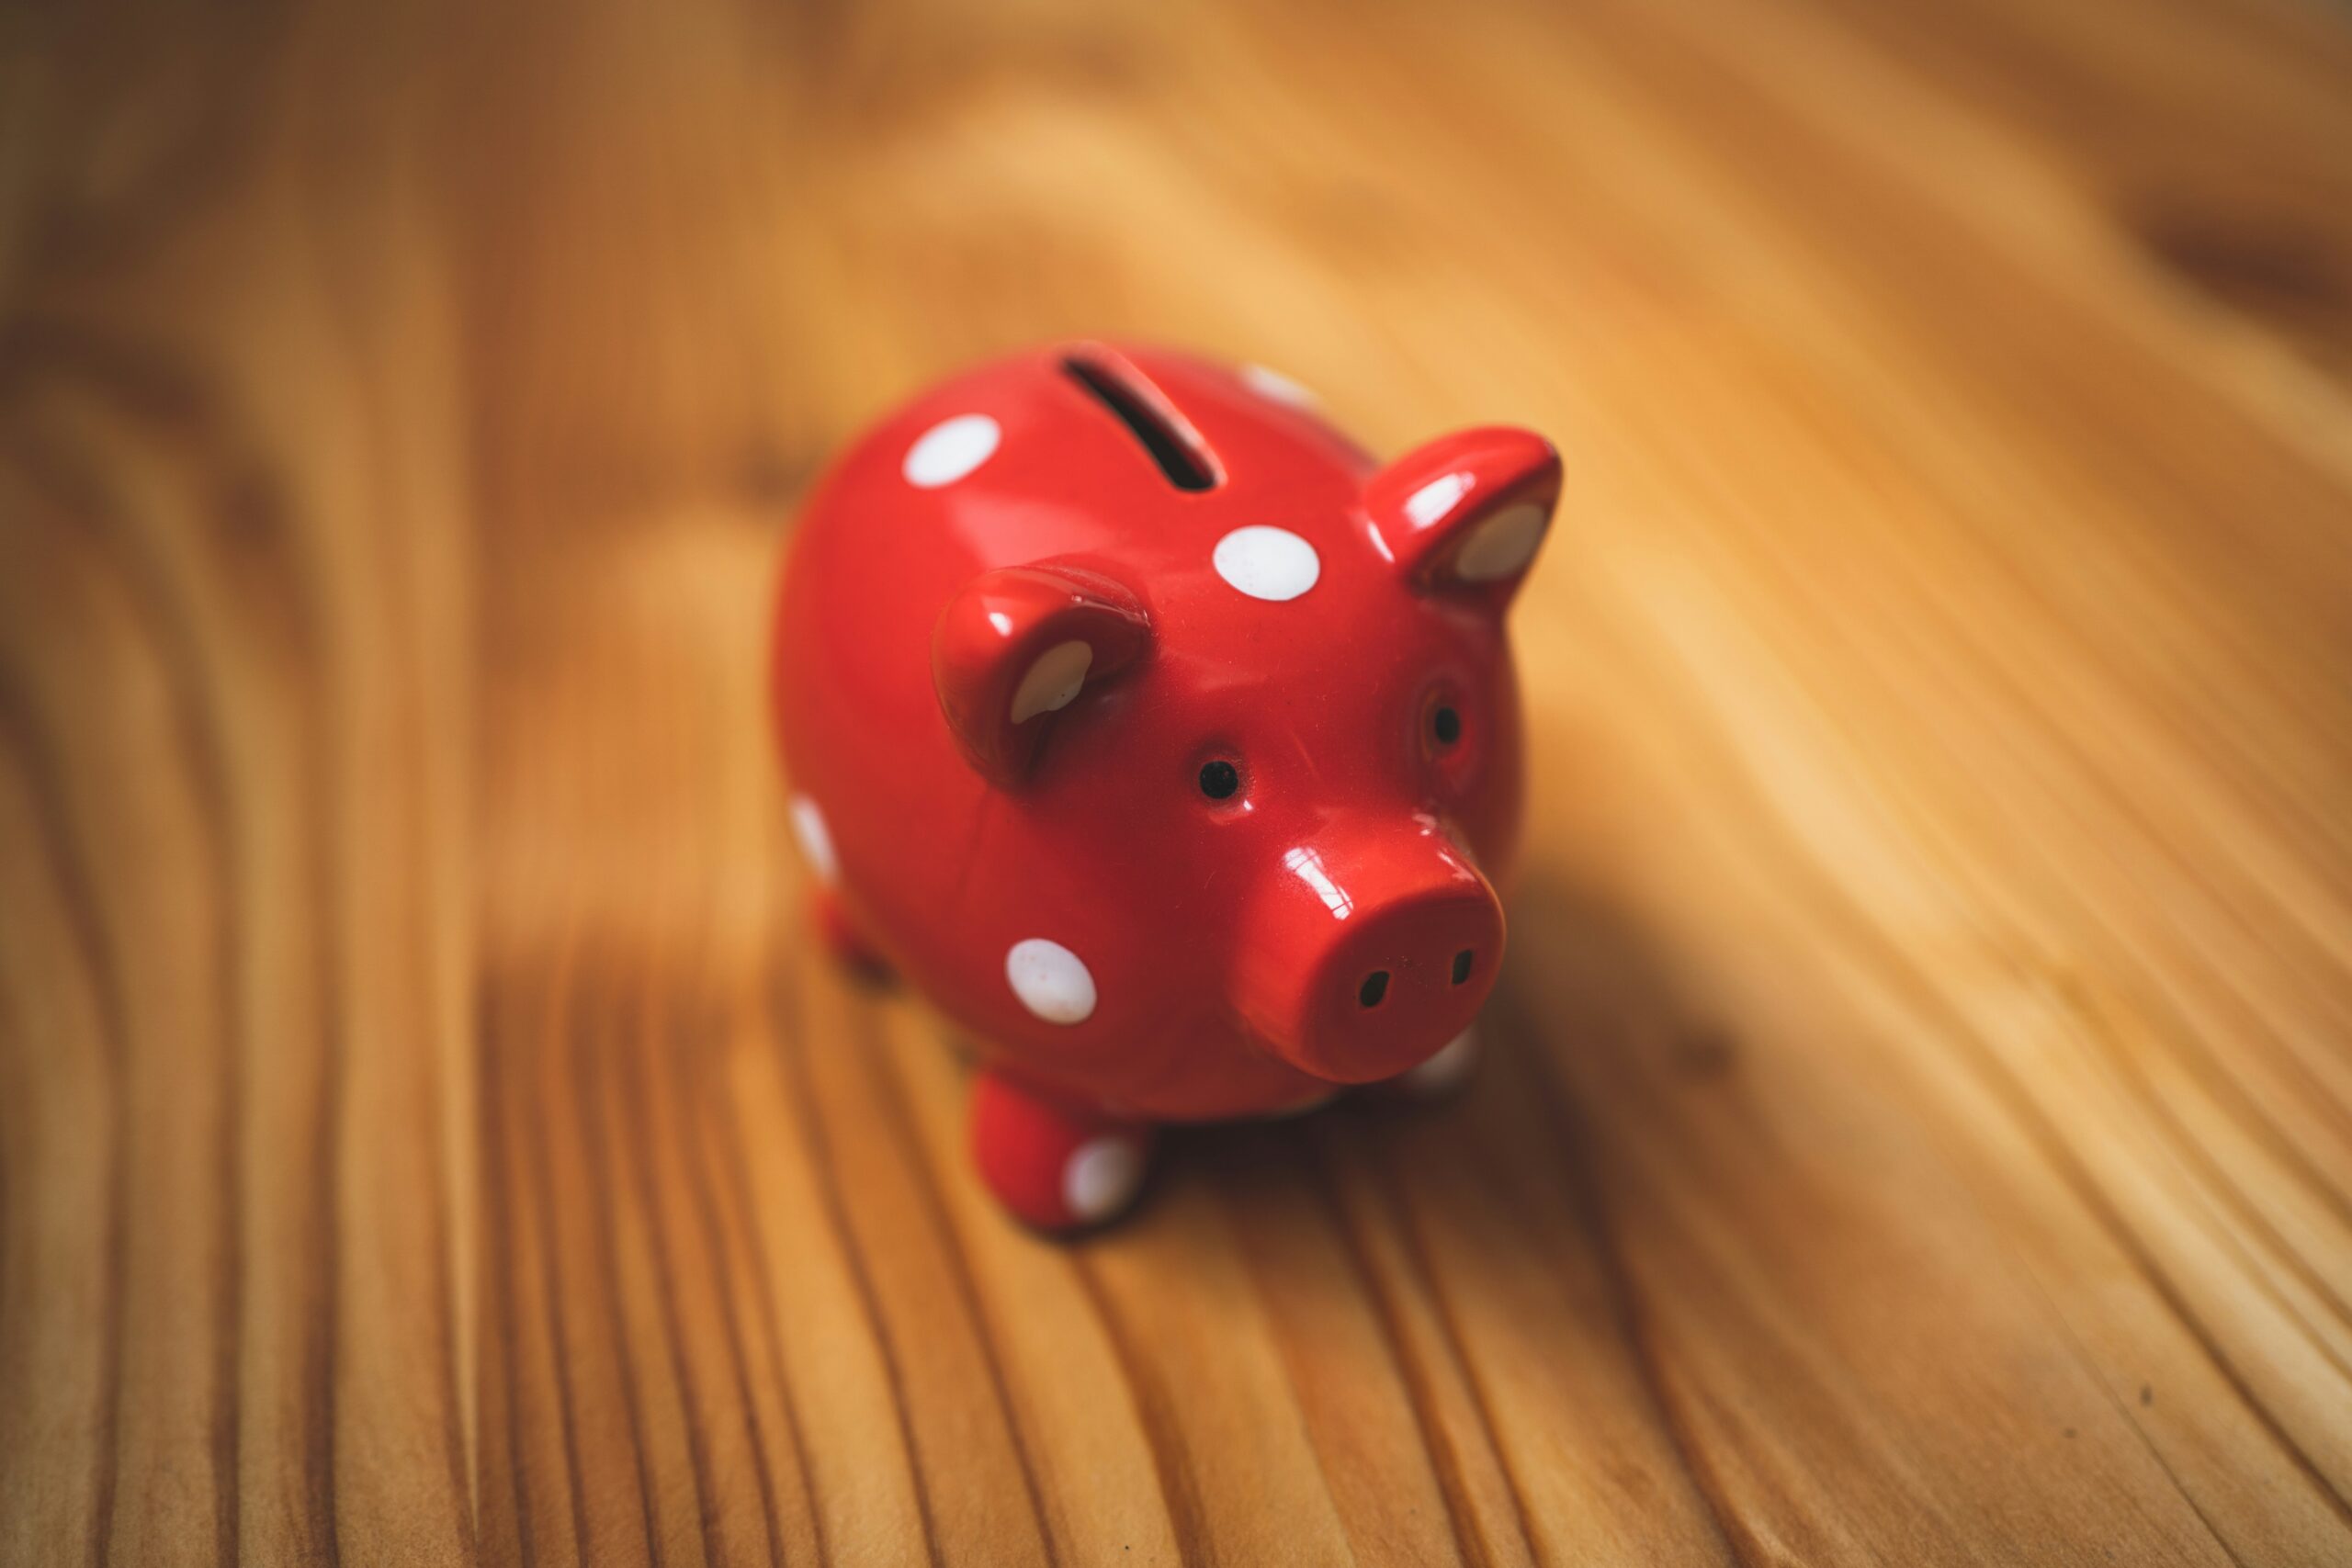 Small piggy bank on a wood surface.